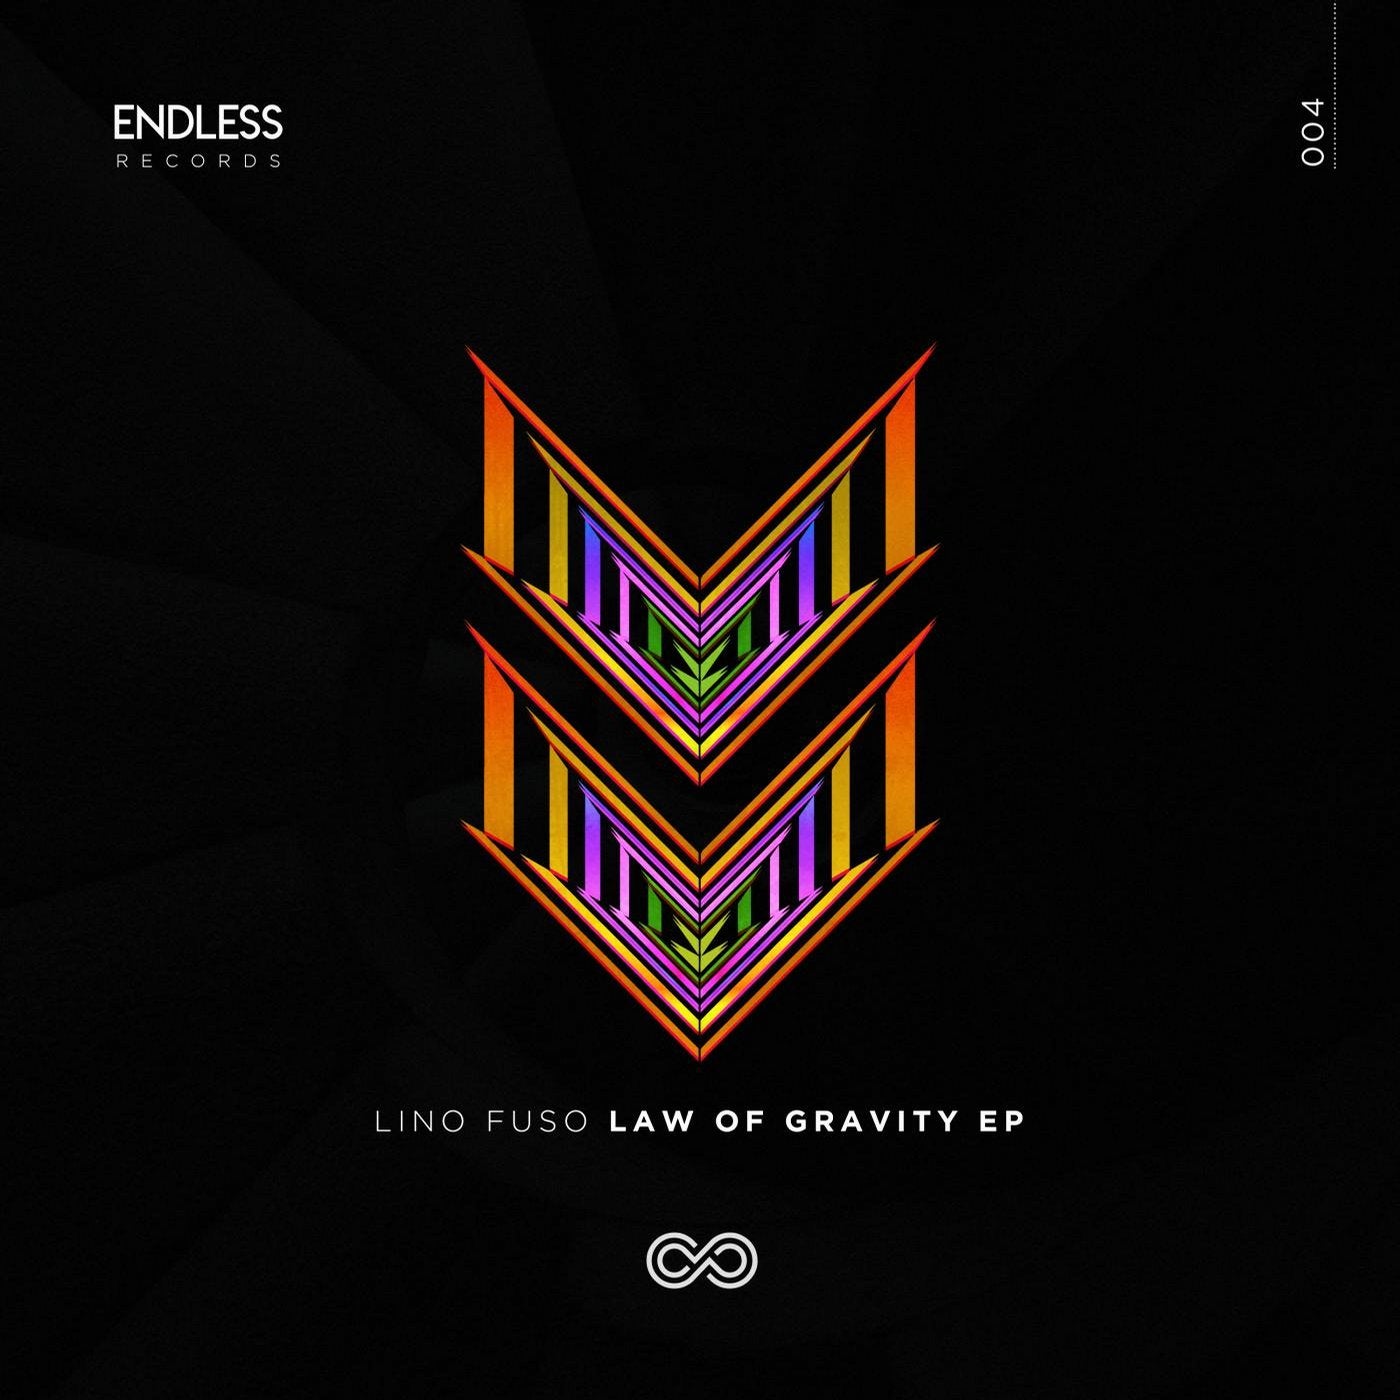 Law Of Gravity EP